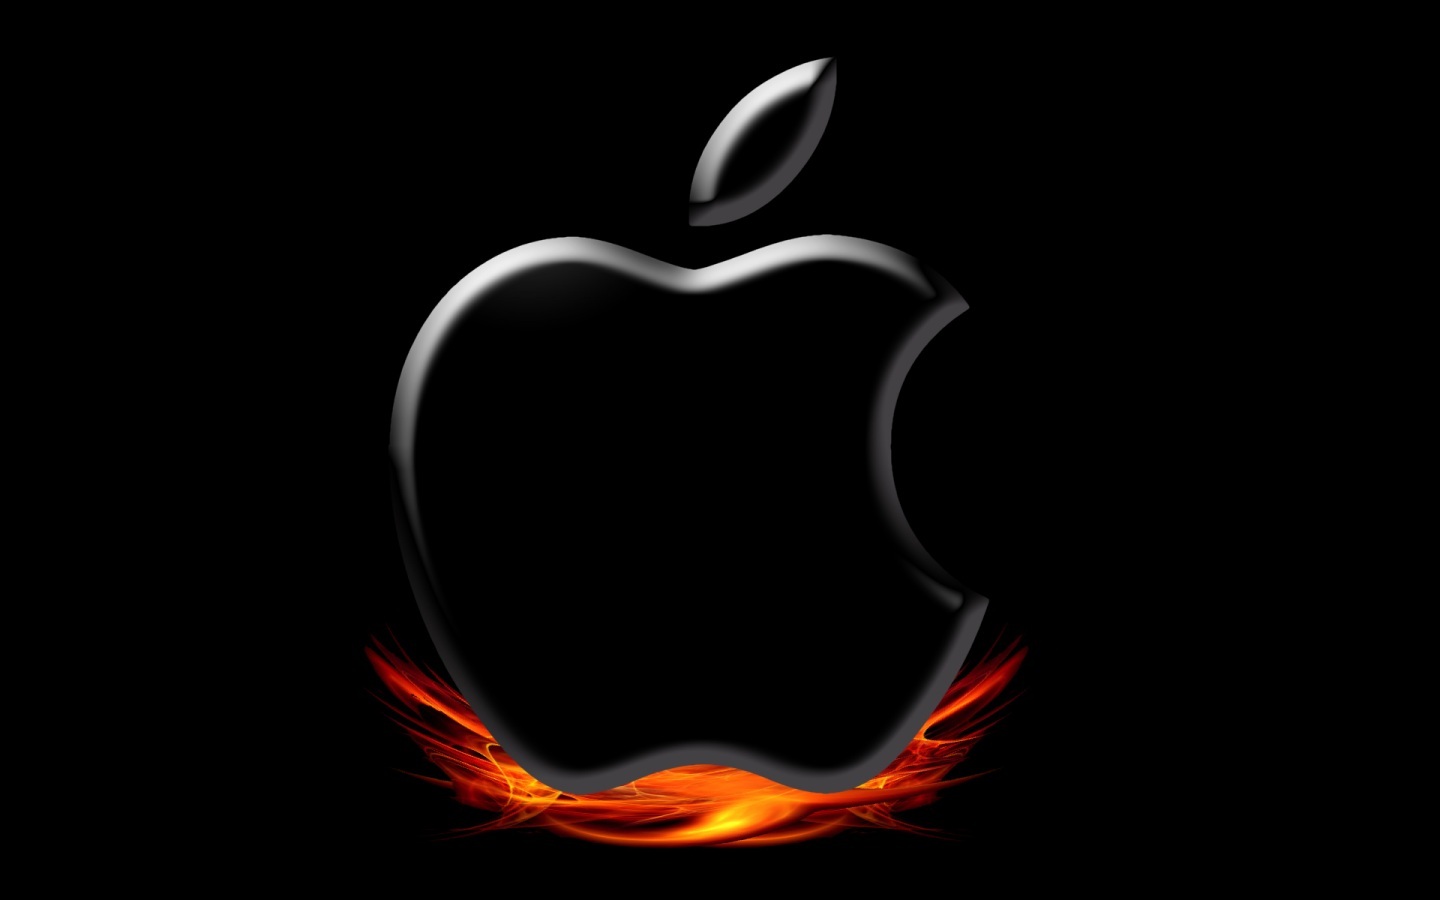 Apple iPad Fire Wallpaper Cool Background For Photo